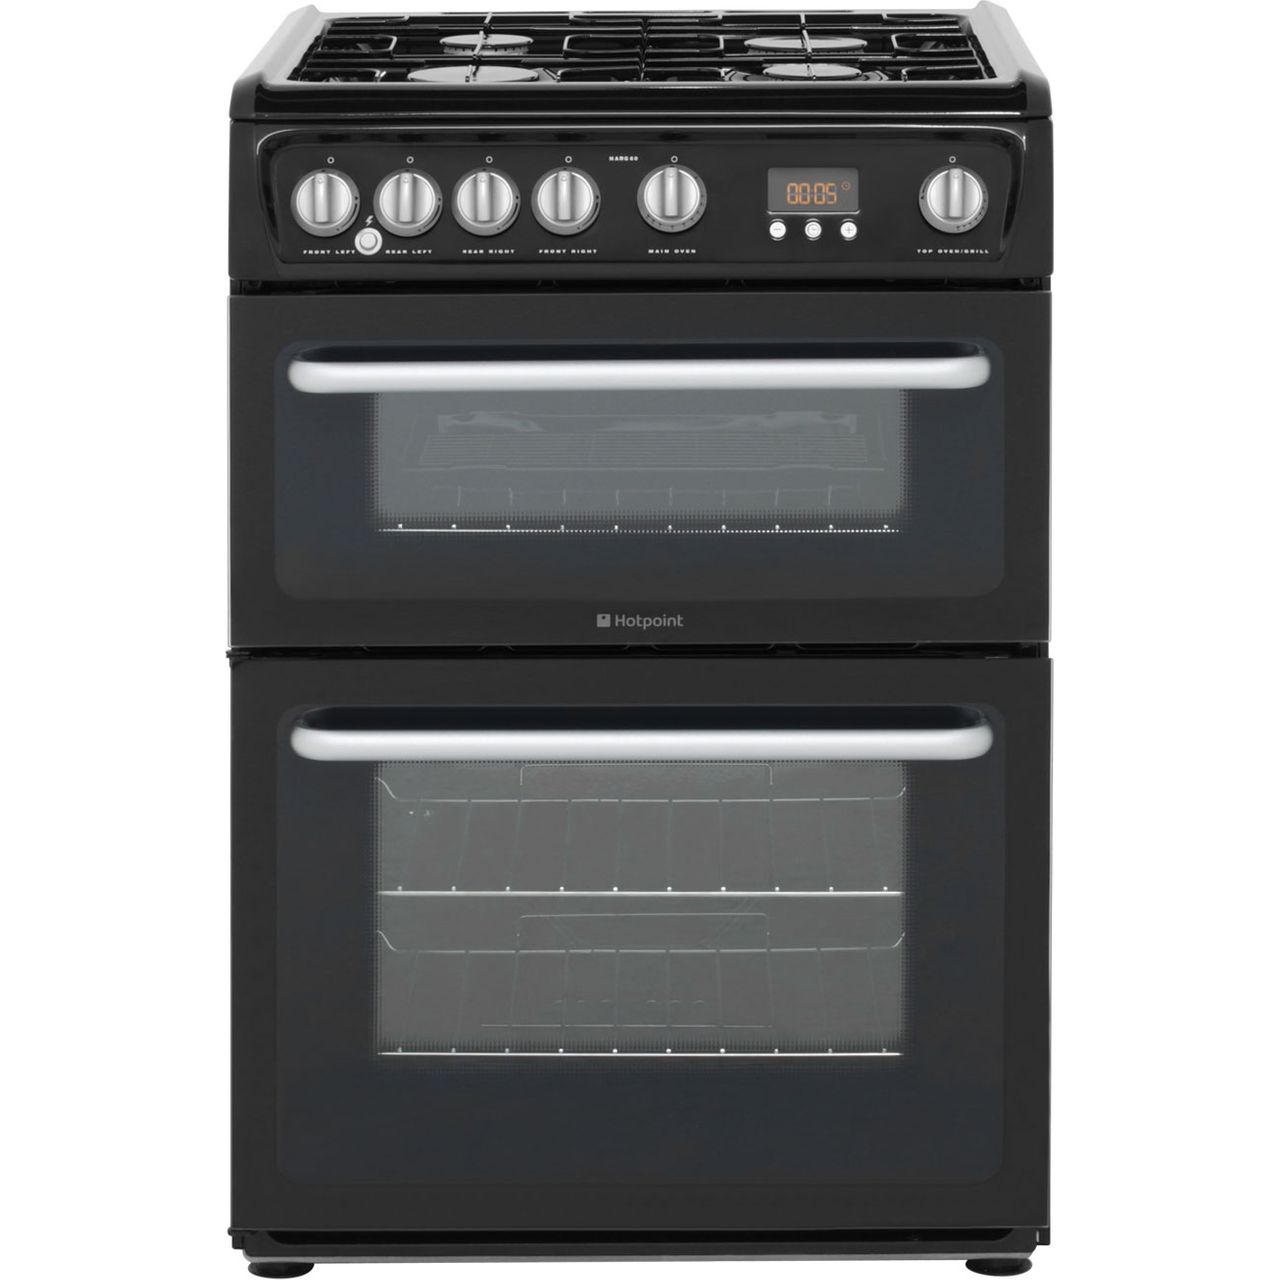 Hotpoint Ultima HARG60K Free Standing Cooker in Black